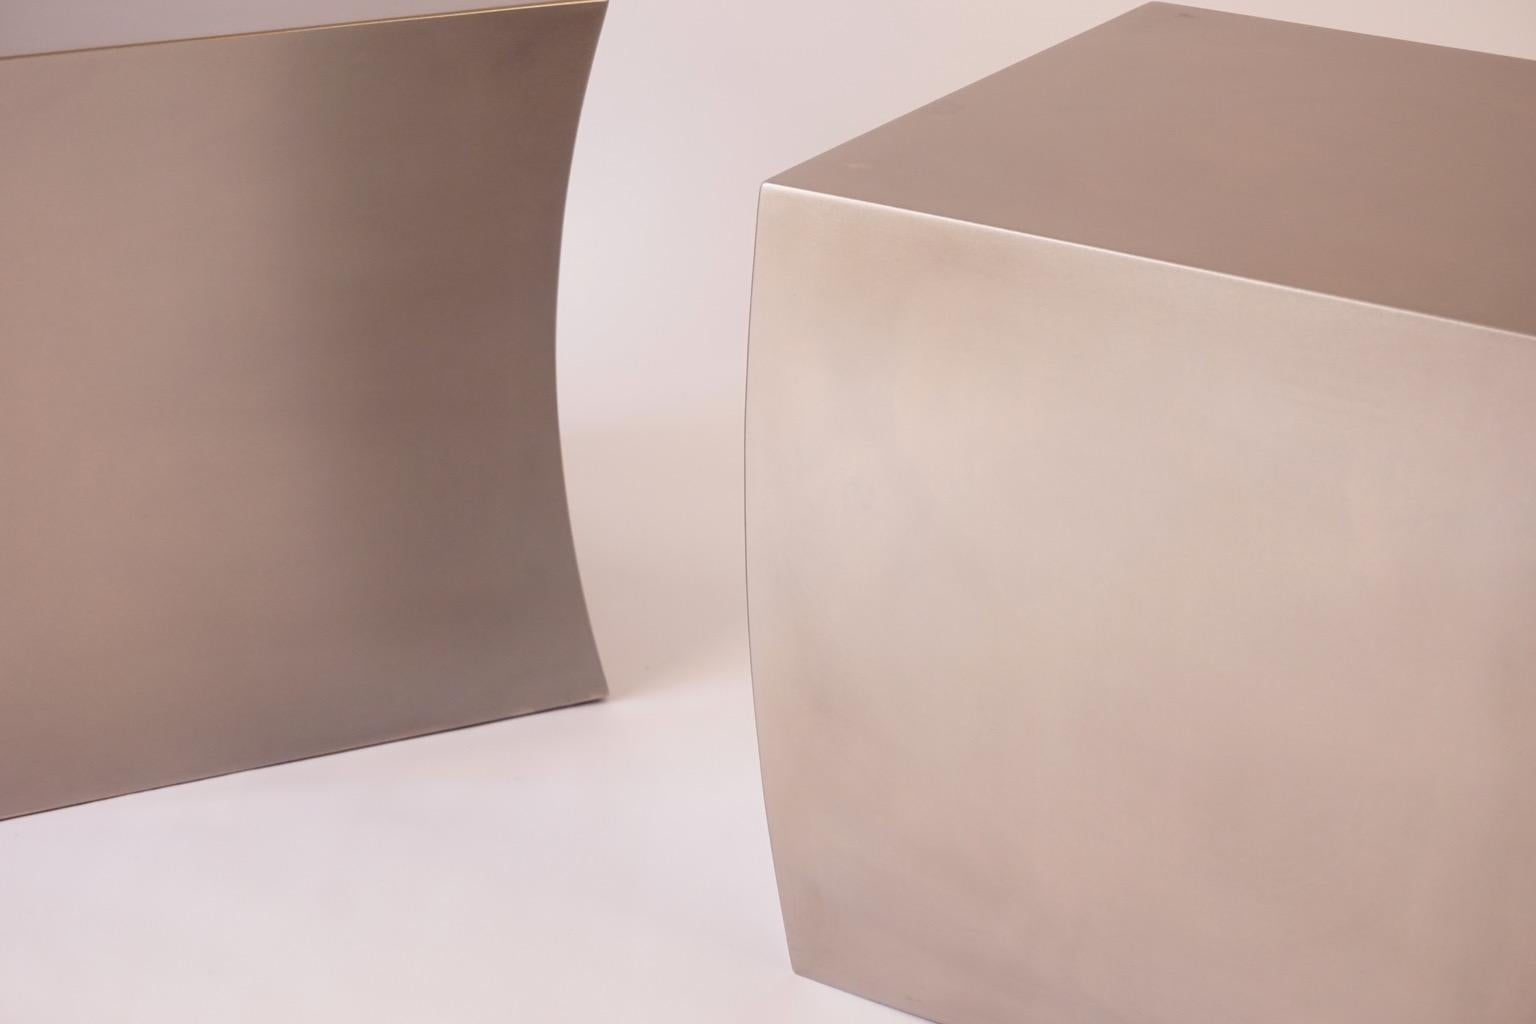 American Sculptural Stainless Steel Pedestal Side Tables, Concave and Convex